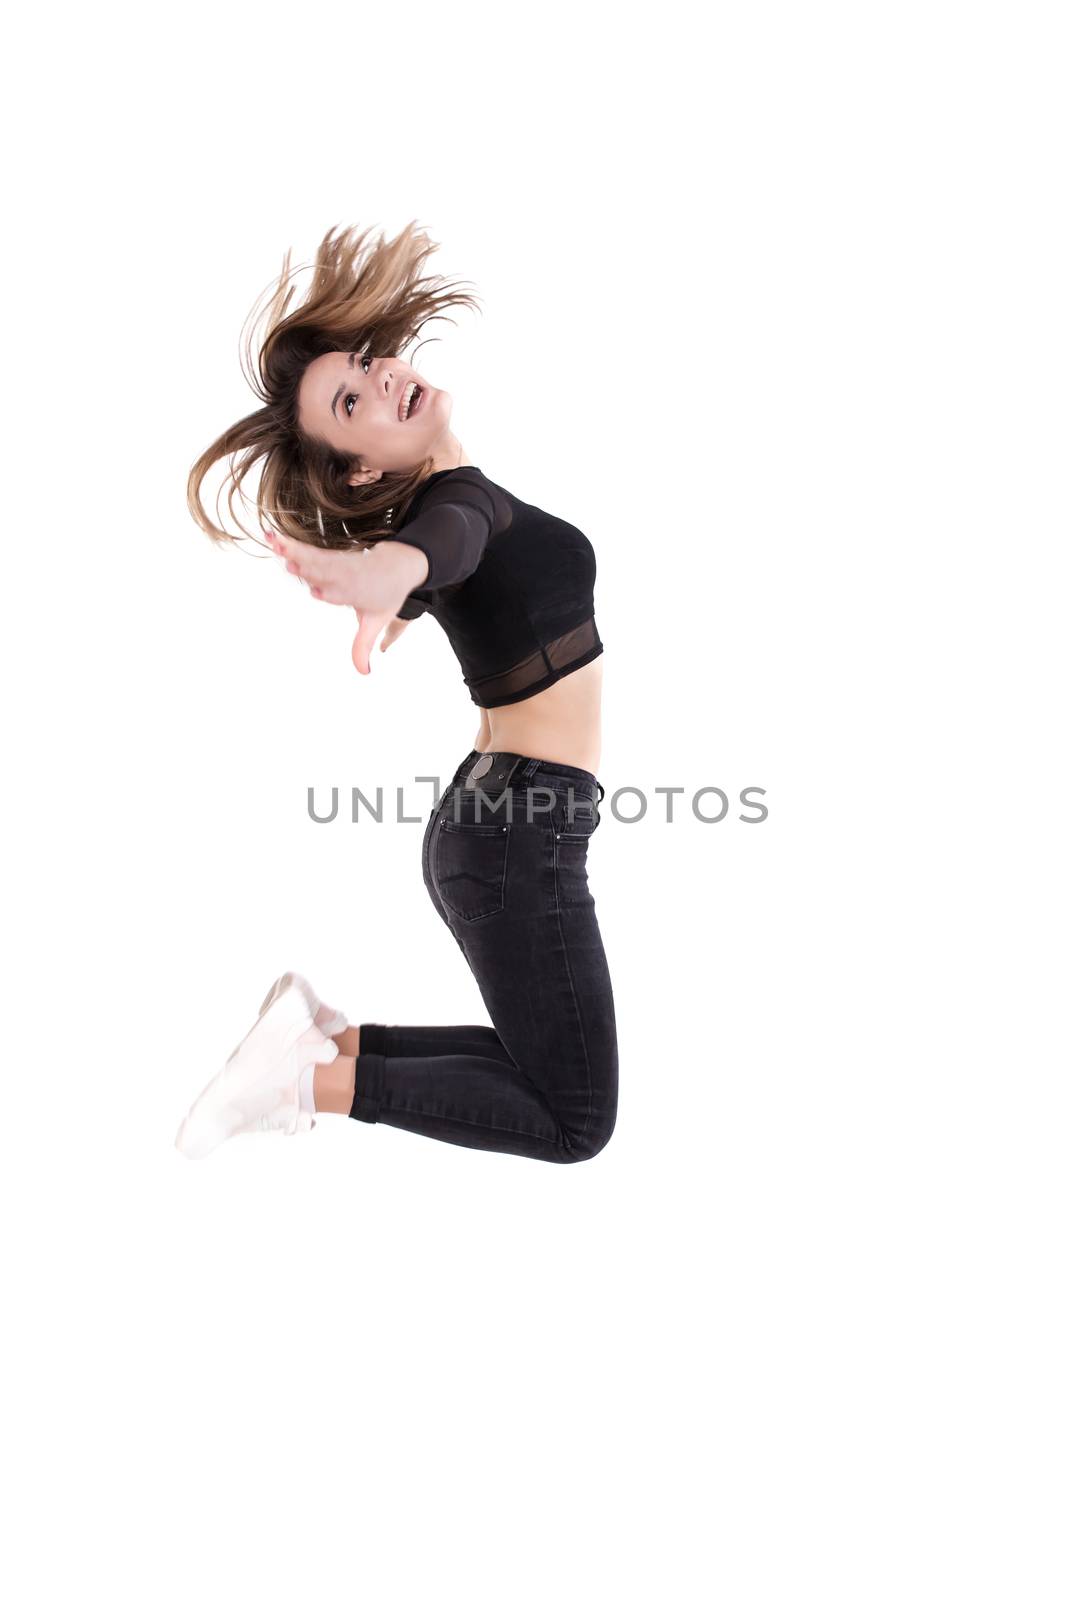 Dancer girl jumping on white background isolated by Angel_a